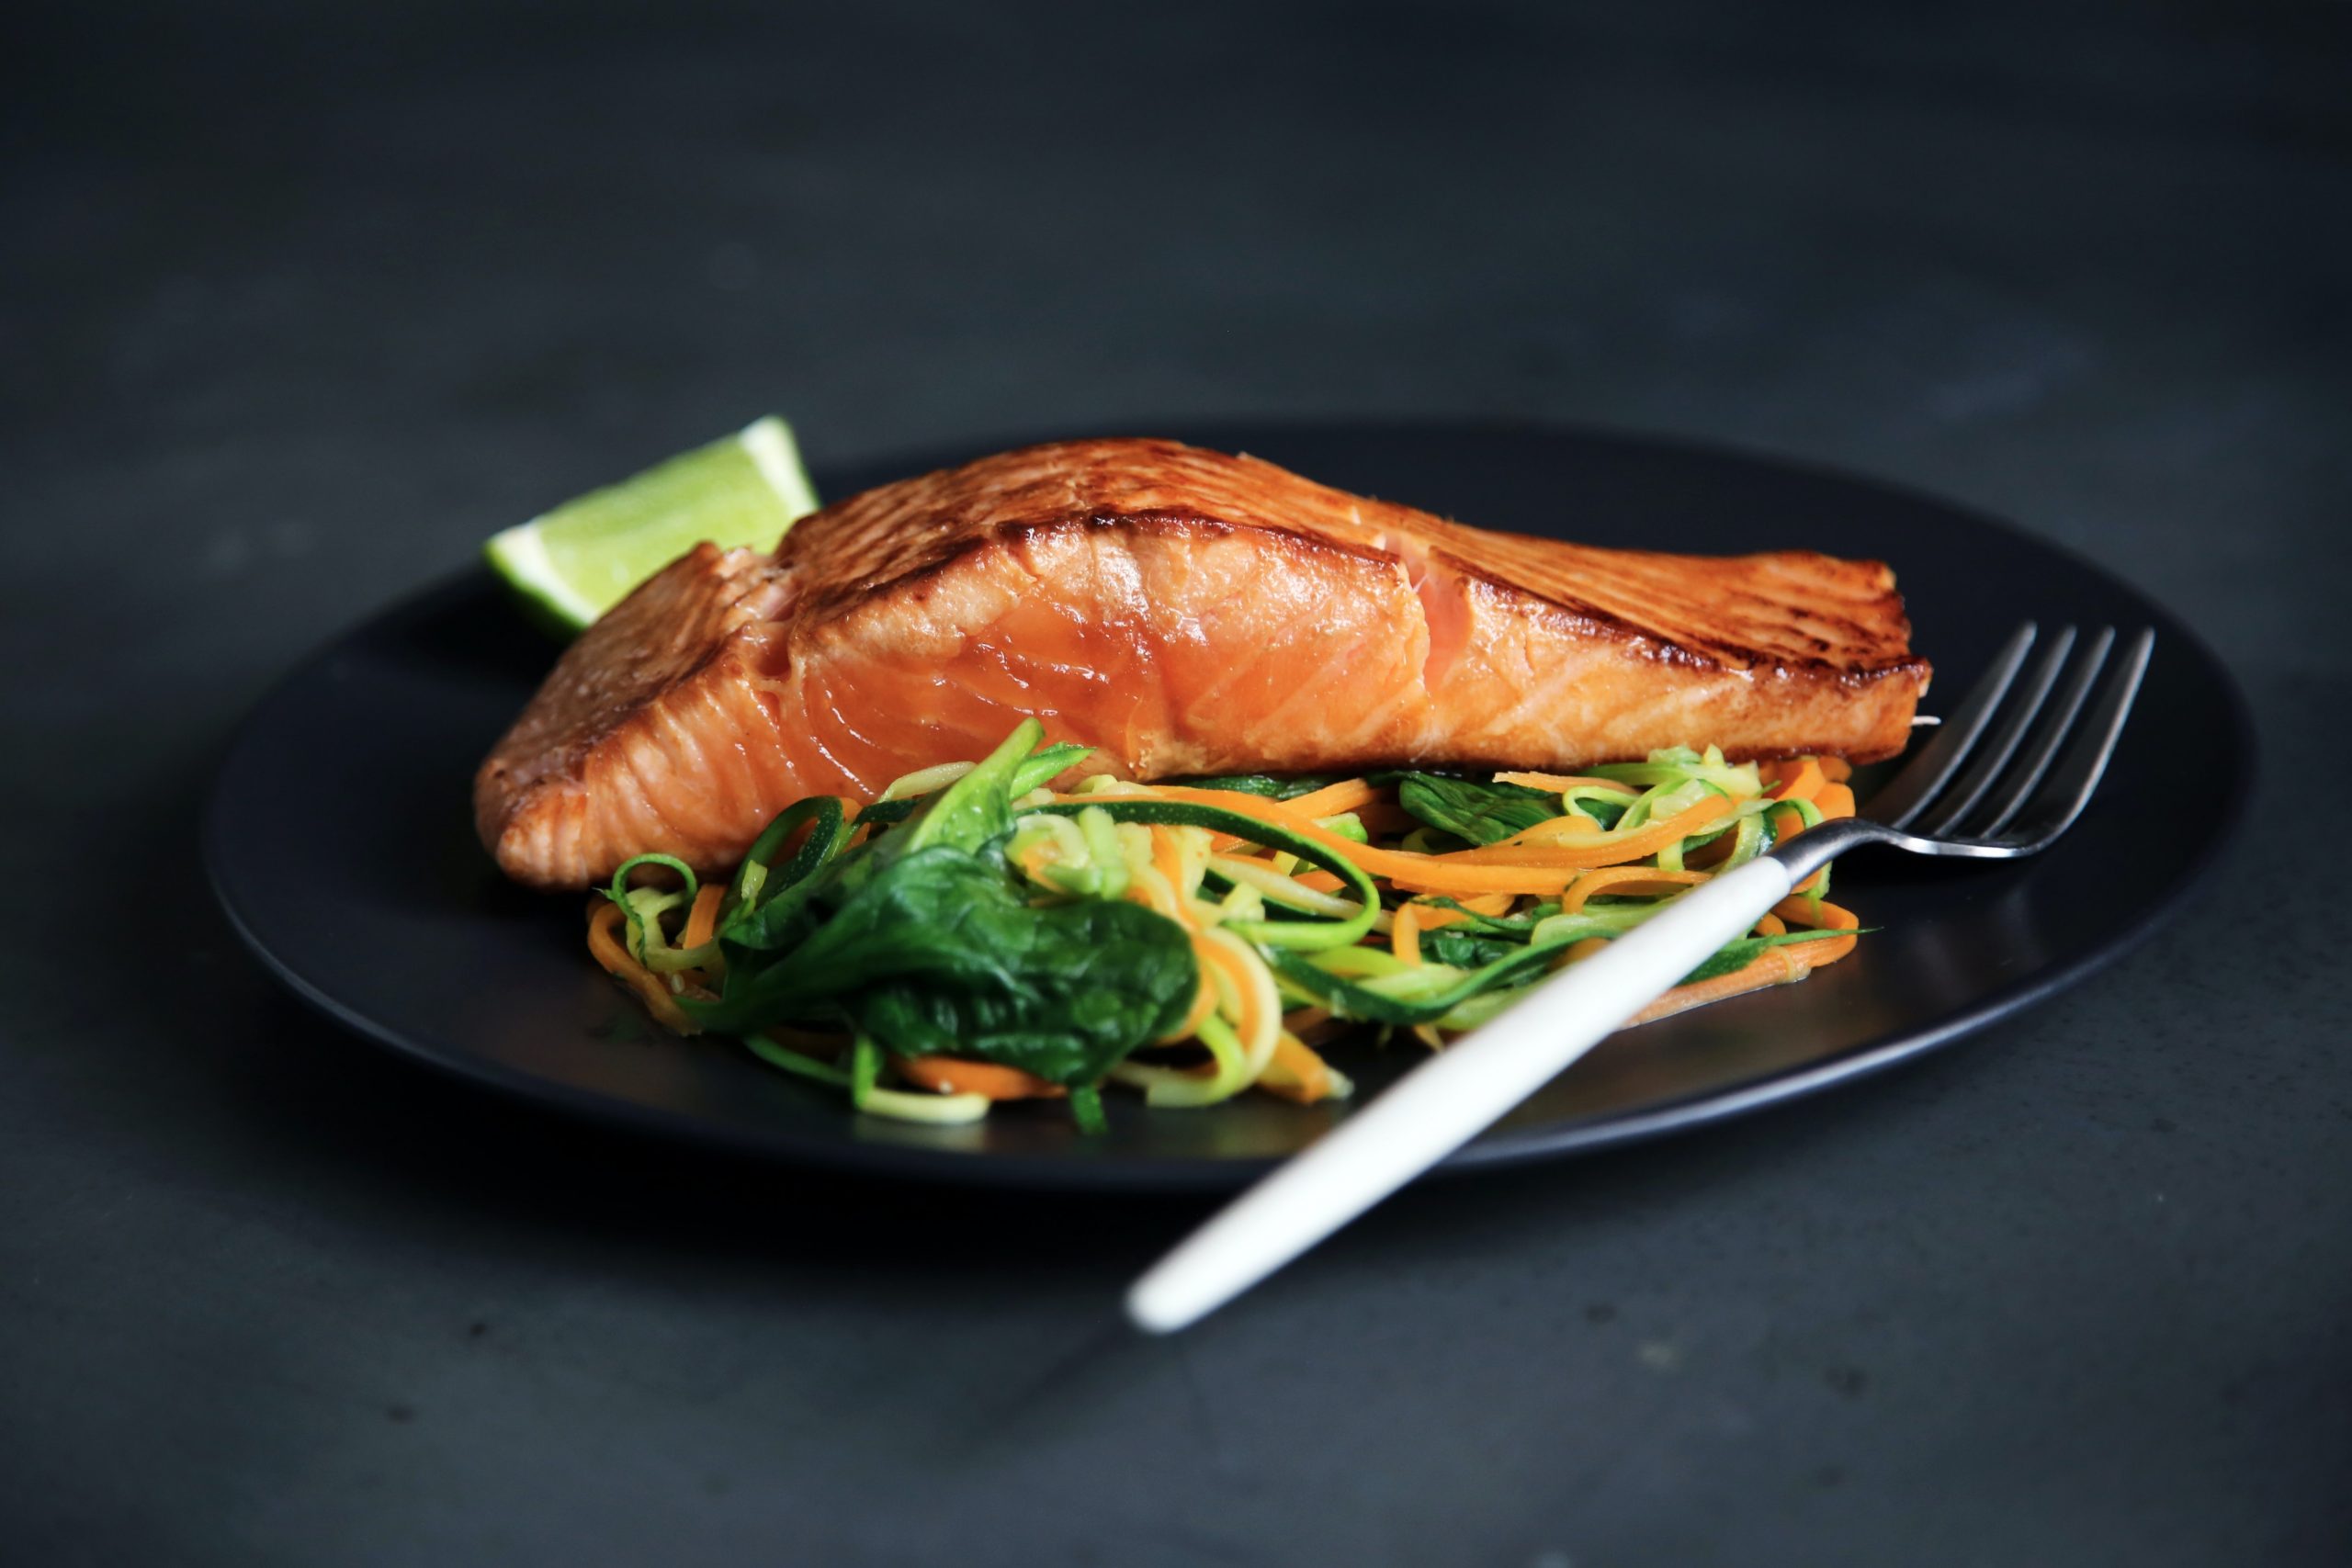 Baked salmon on top of vegetables noodles on a black plate